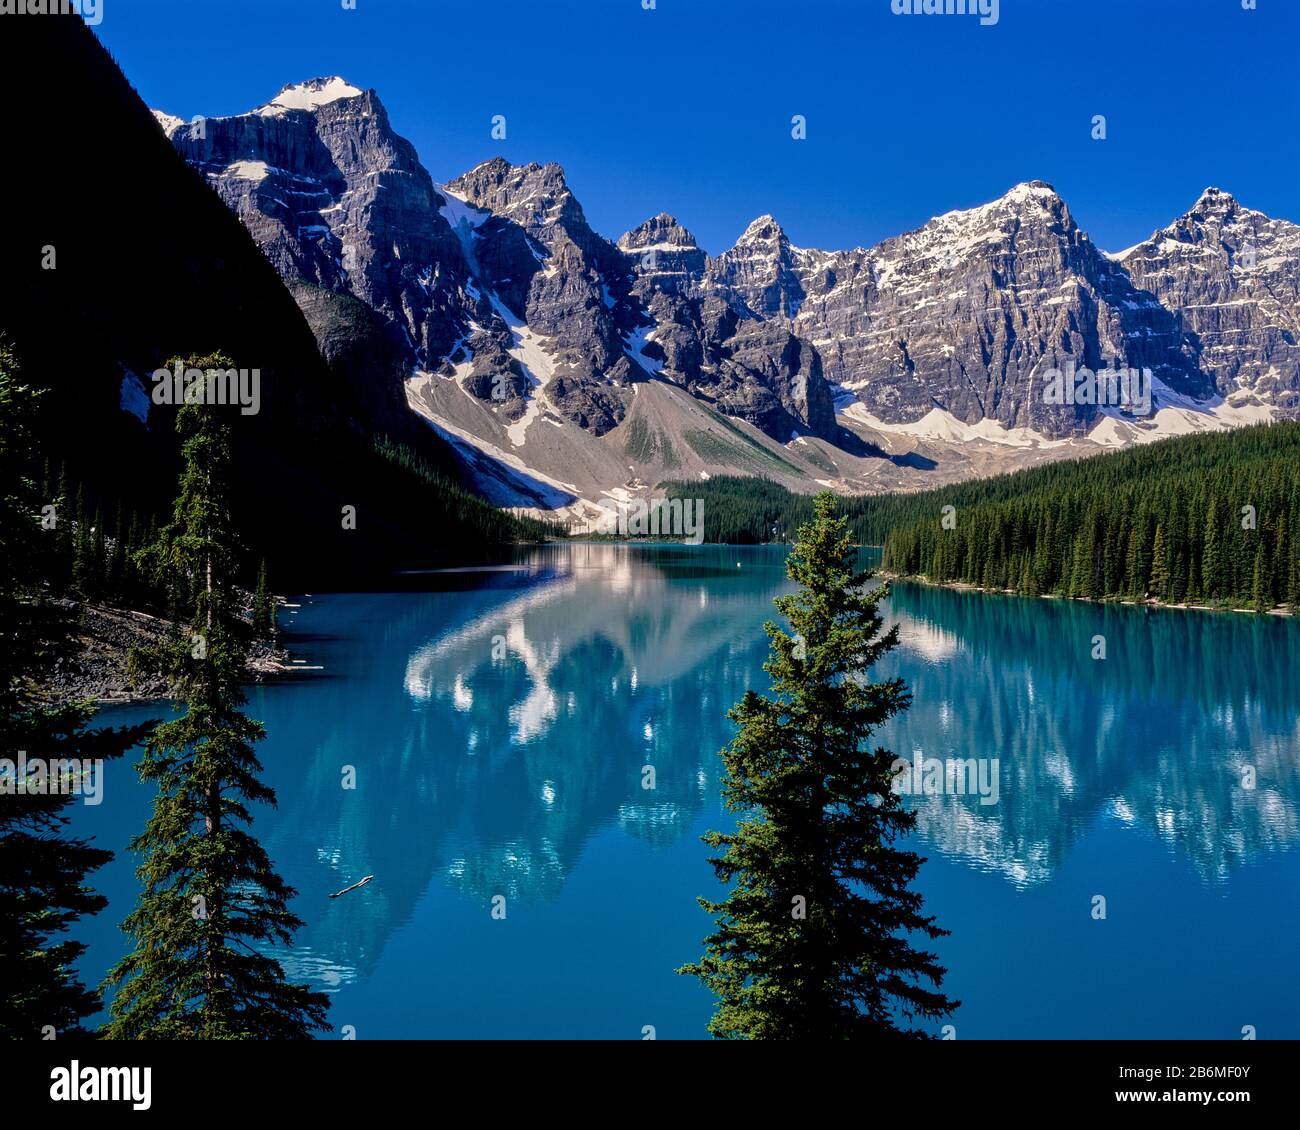 View of Maligne Lake with forest and mountains reflected in water, Banff National Park, Alberta, Canada Stock Photo